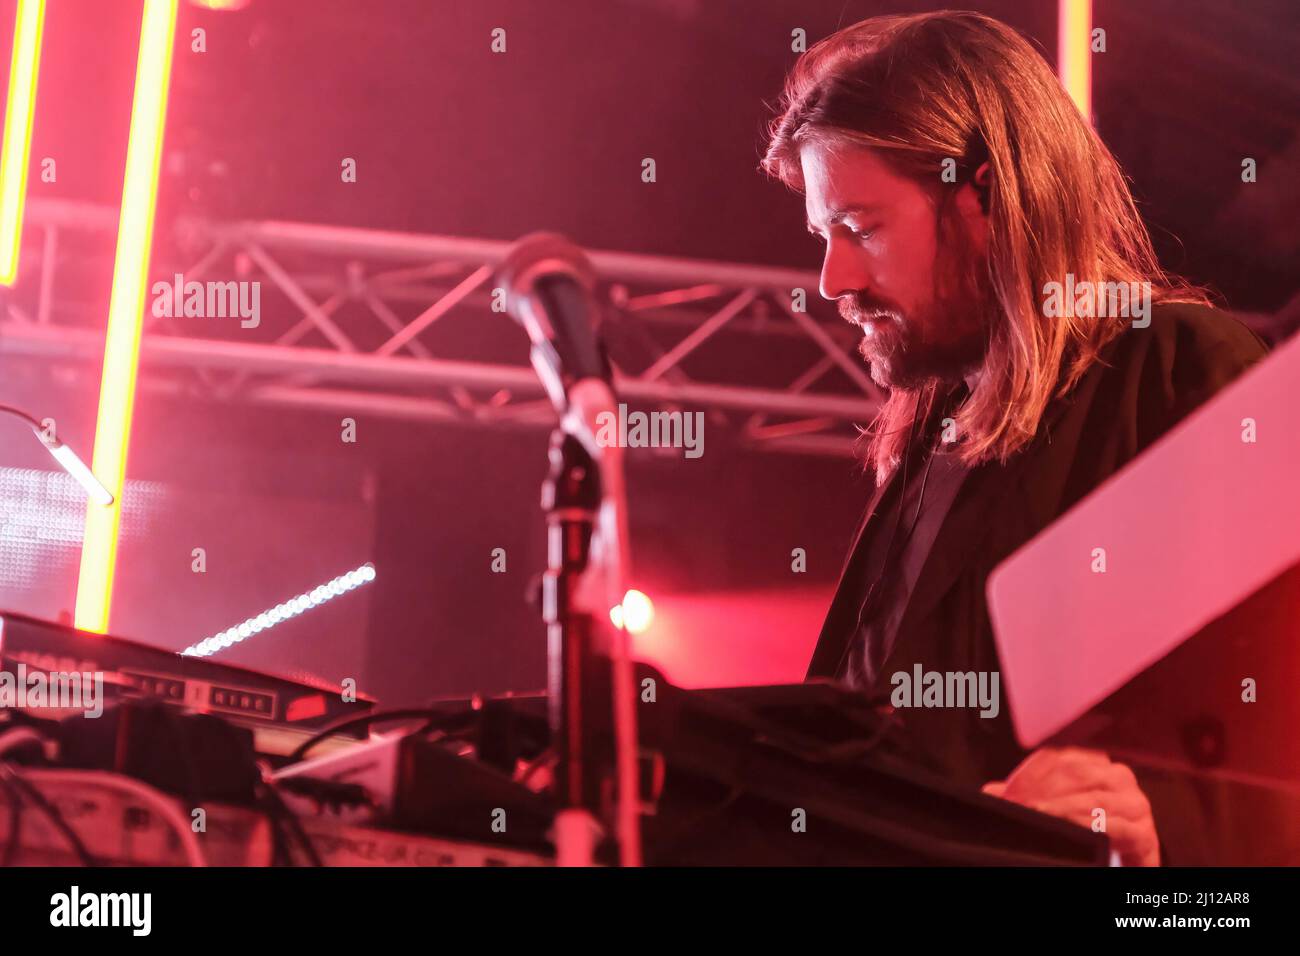 Southampton, UK. 21st Mar, 2022. Paul Frick, Berlin born musician composer and keyboard player, formerly of Brandt Brauer Frick, on stage with German electronic band Tangerine Dream founded in 1967, performing live at the Engine Rooms, Southampton. (Photo by Dawn Fletcher-Park/SOPA Images/Sipa USA) Credit: Sipa USA/Alamy Live News Stock Photo